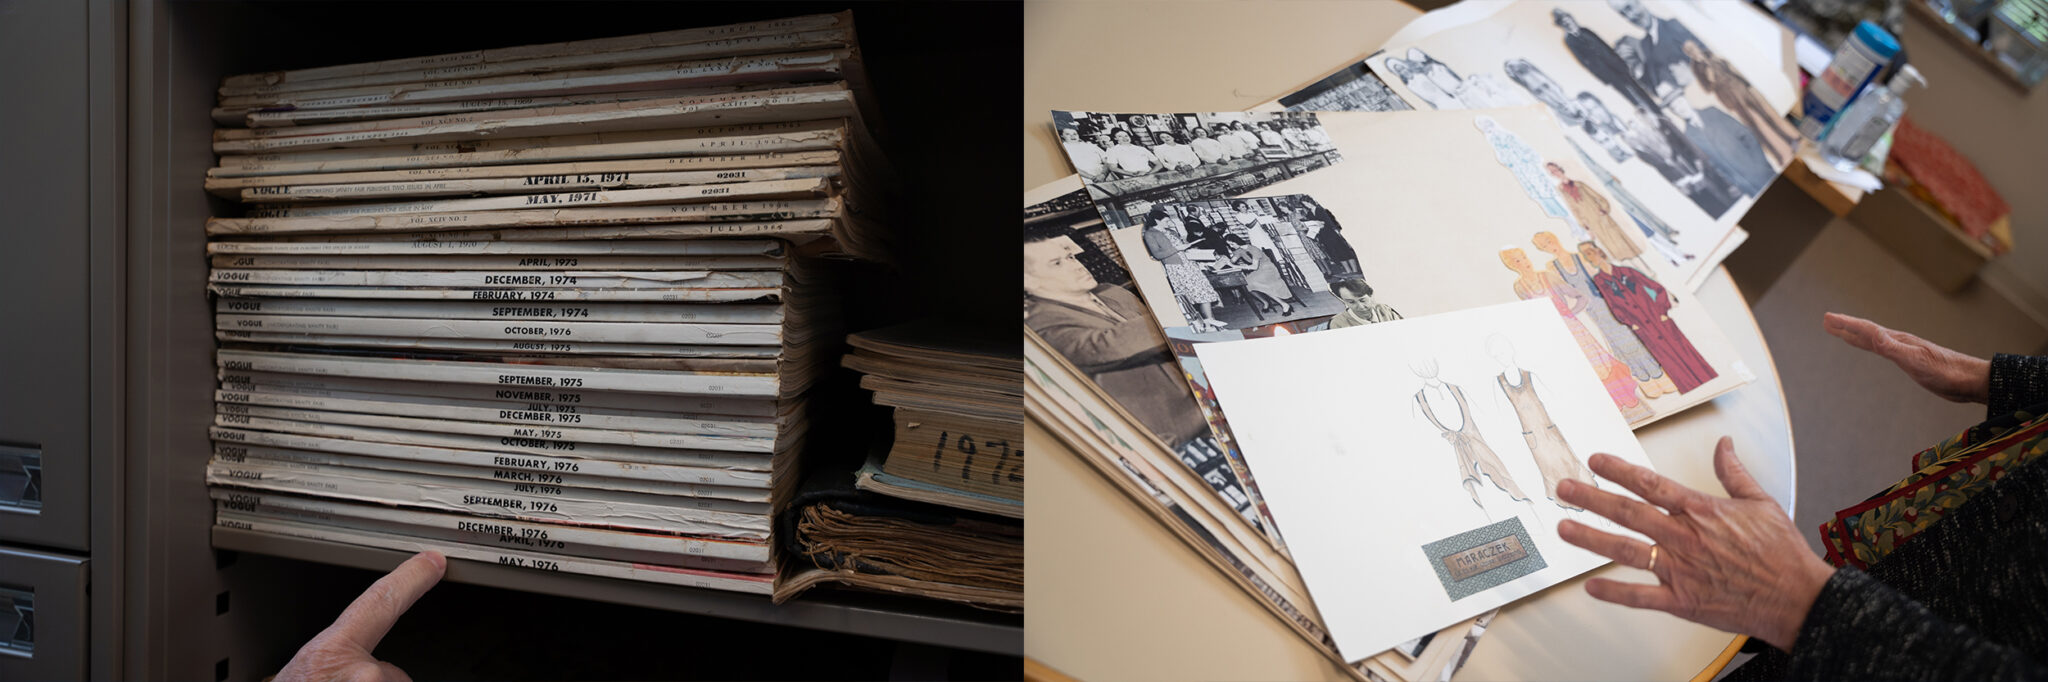 On the left: stacks of Vogue and other fashion magazines. On the right: a closeup of Bobbi Owen's hands and her sketches.